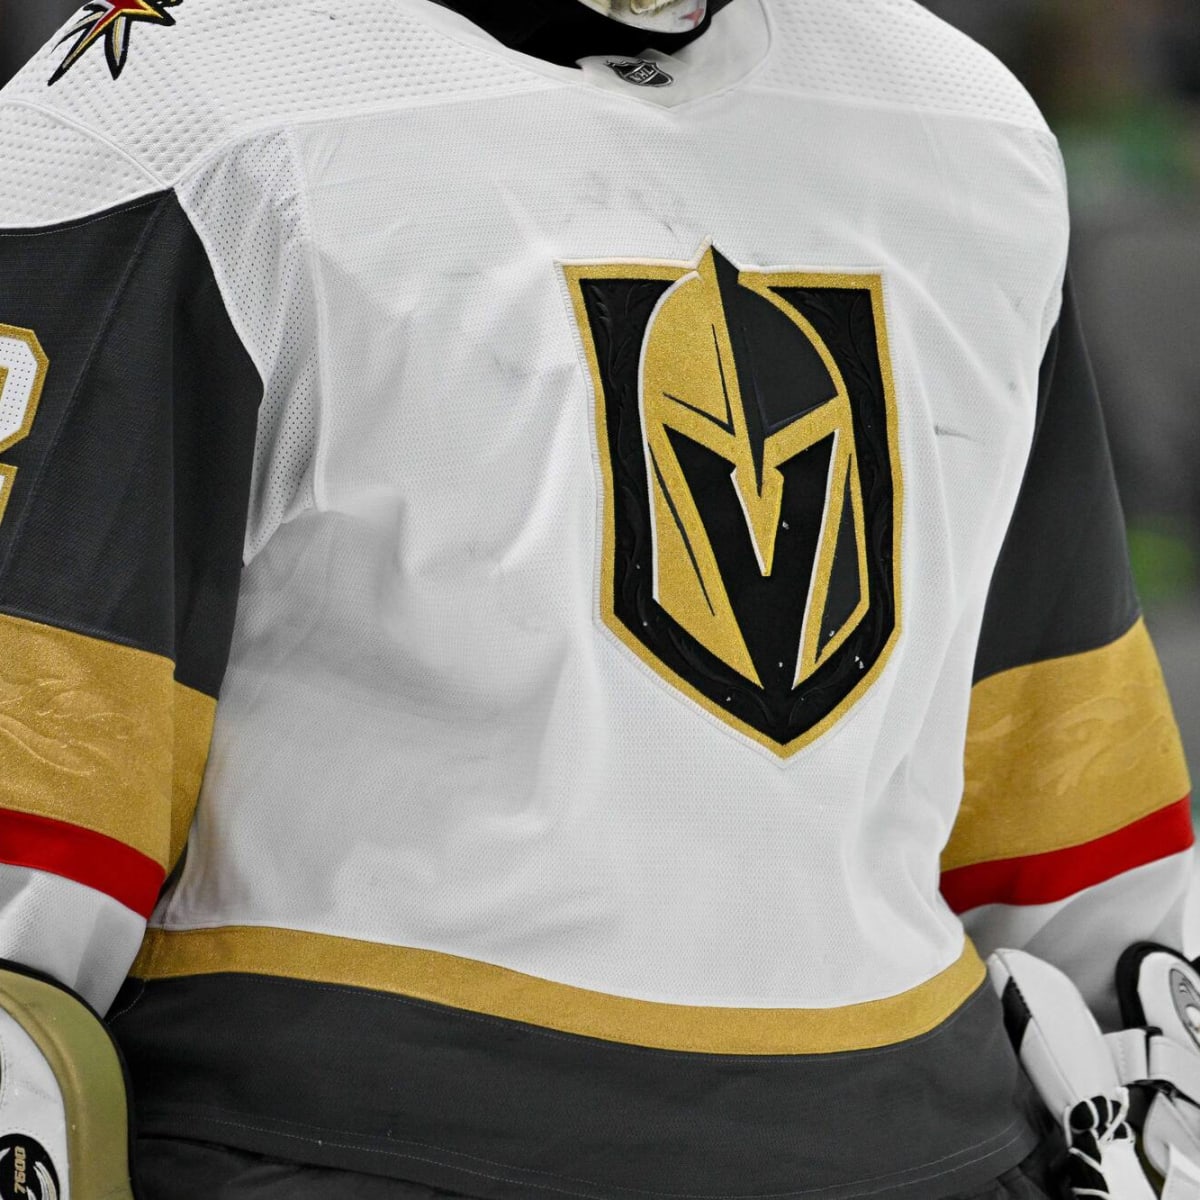 Vegas Golden Knights on X: Always do it right for Nevada Day